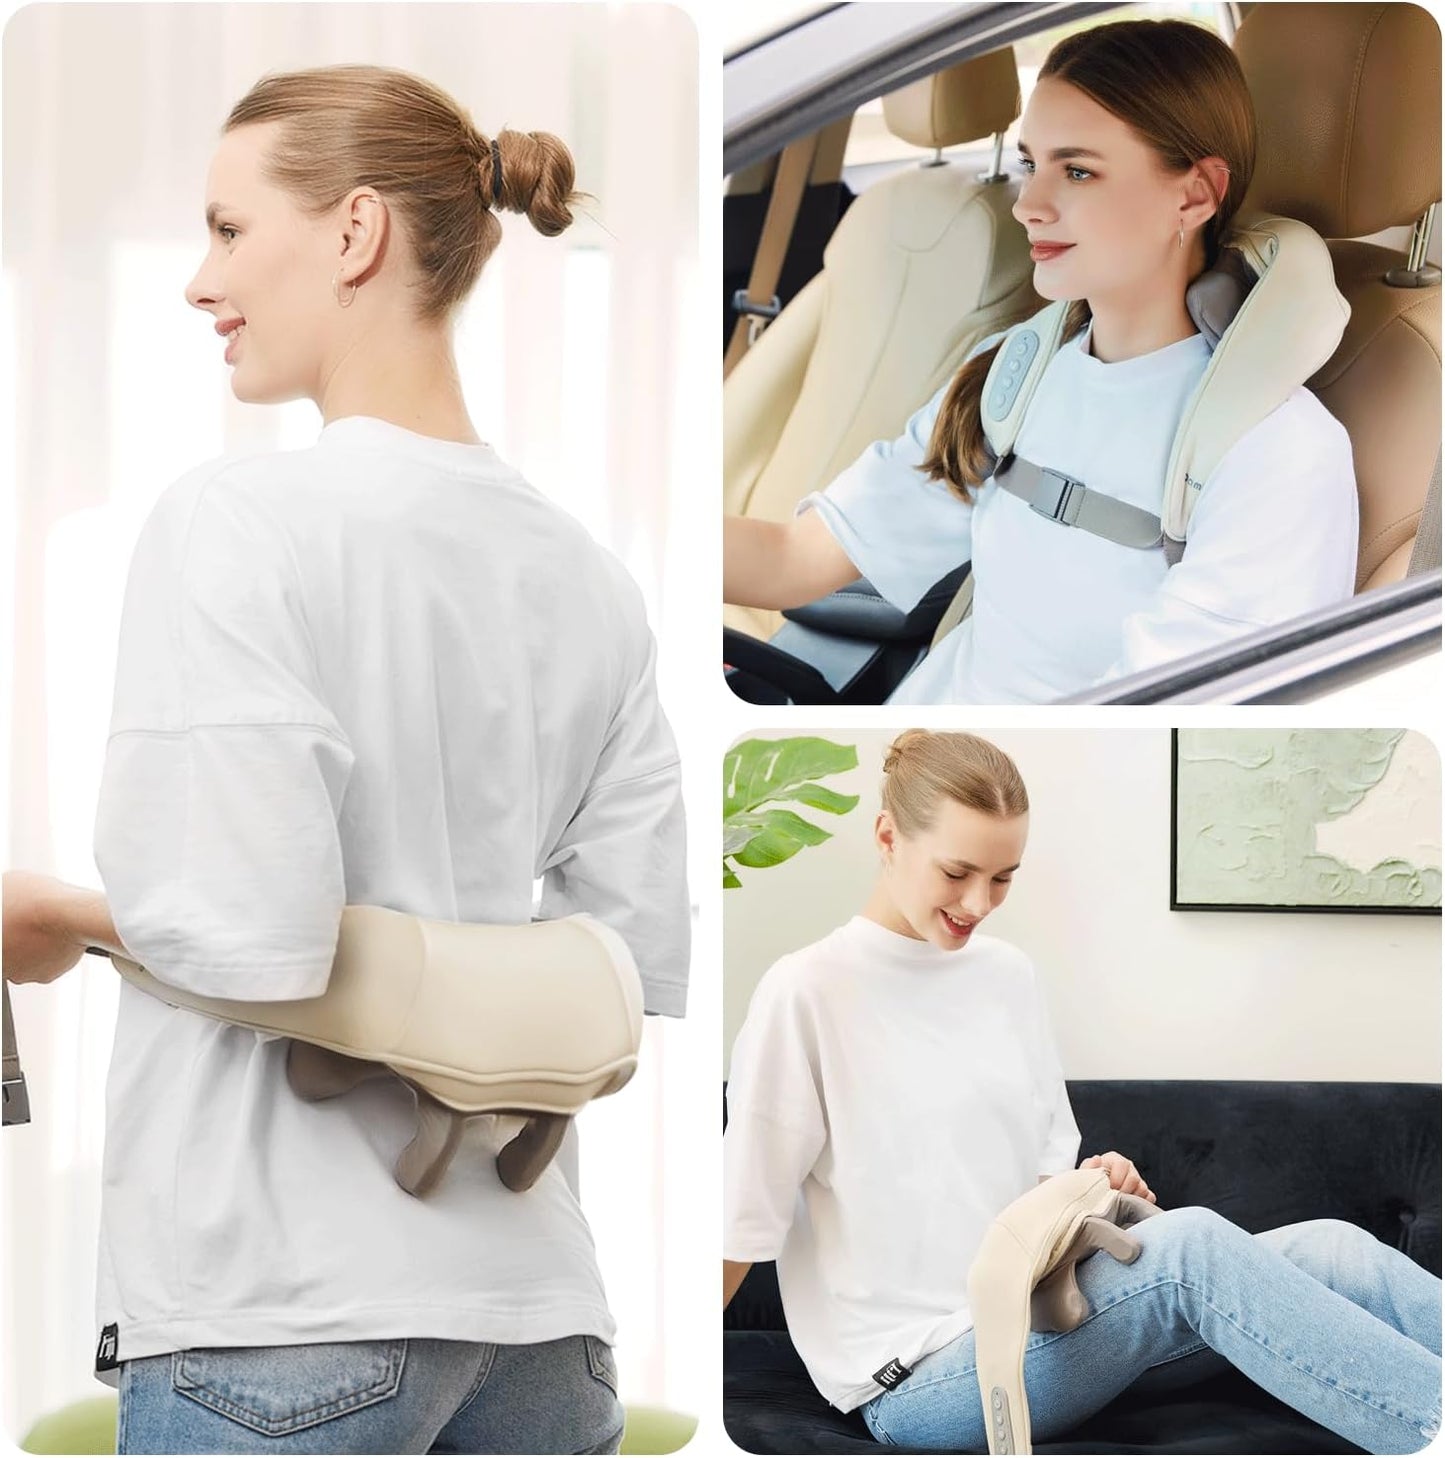 Kneading Neck Massager - Instant Relaxation Anytime